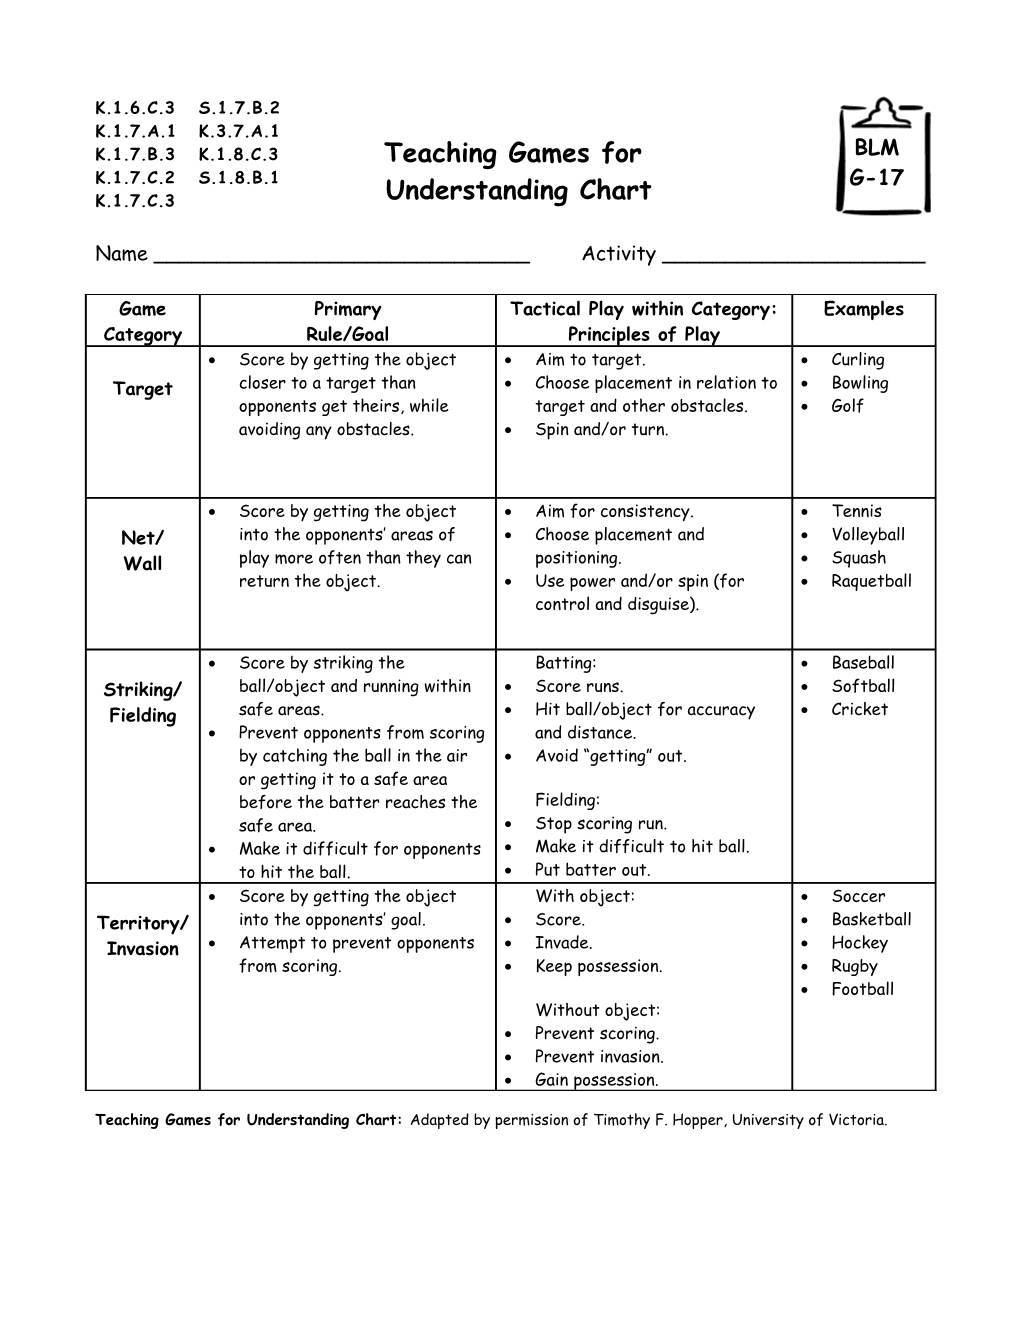 Teaching Games for Understanding Chart: Adapted by Permission of Timothy F. Hopper, University